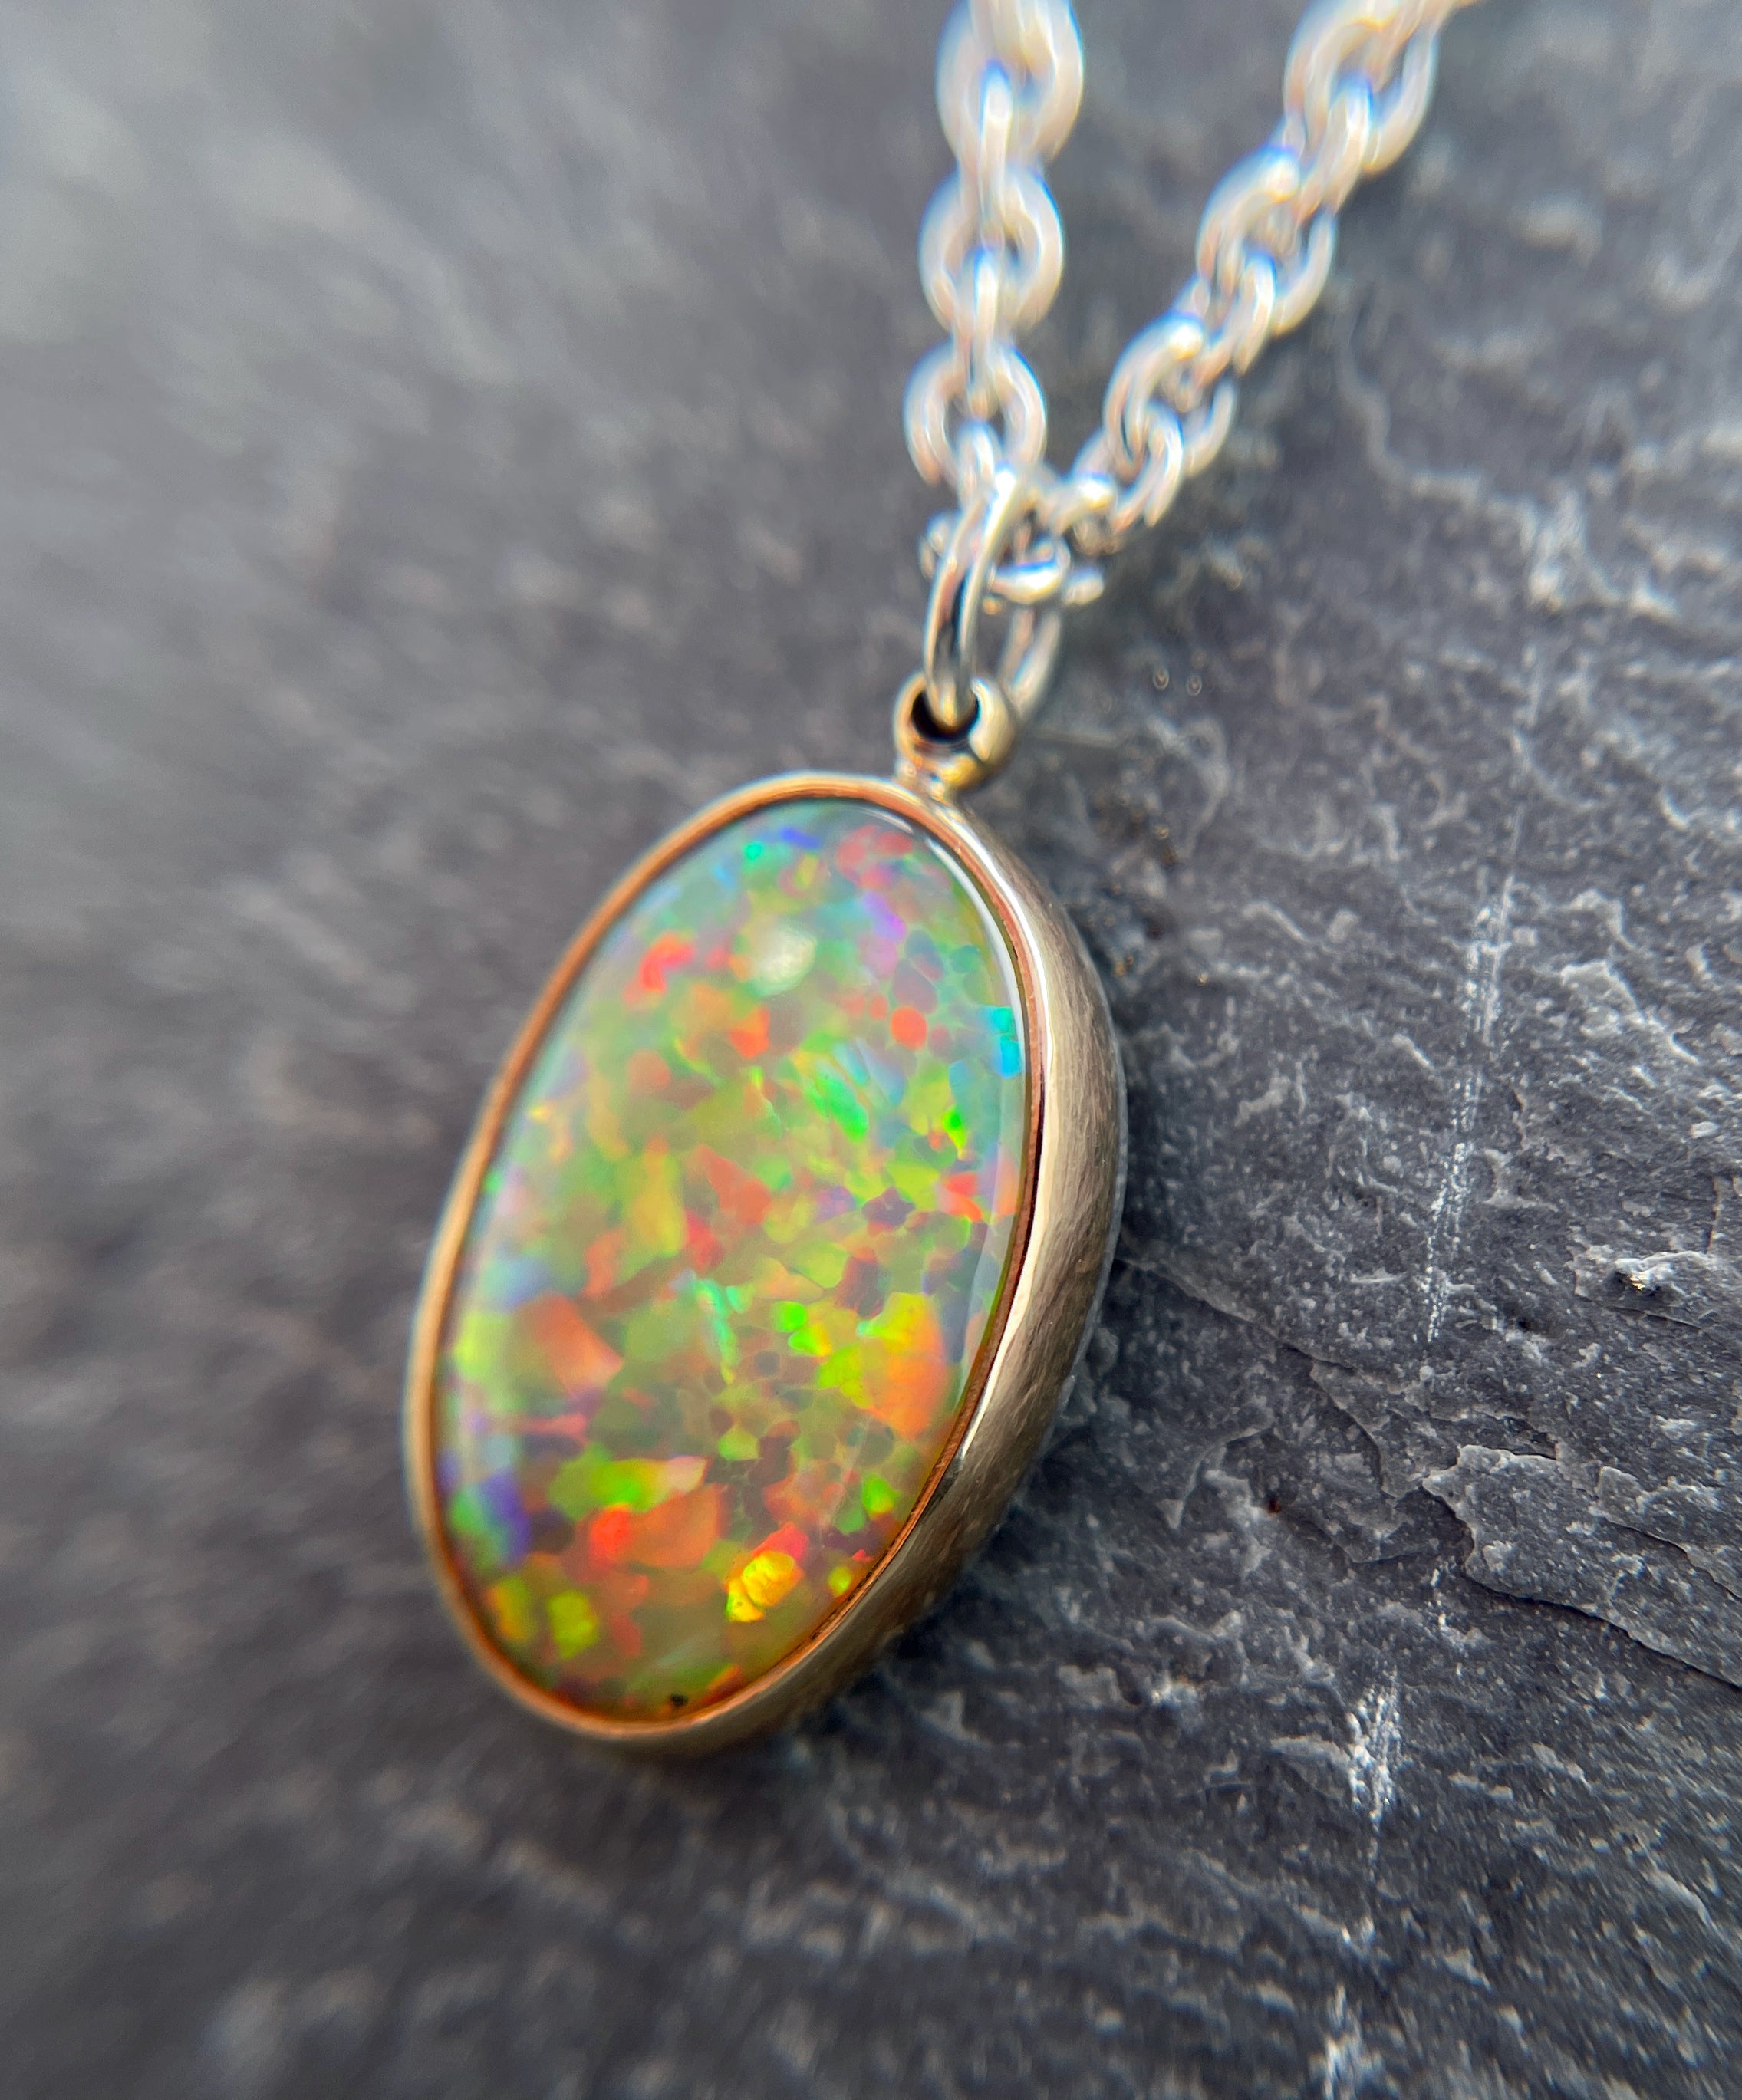 Opal Necklace in Solid 14k Gold and Sterling Silver, Handmade Solid Gold Oval Ethiopian Opal Pendant, Opal Statement Necklace, Gift for Her